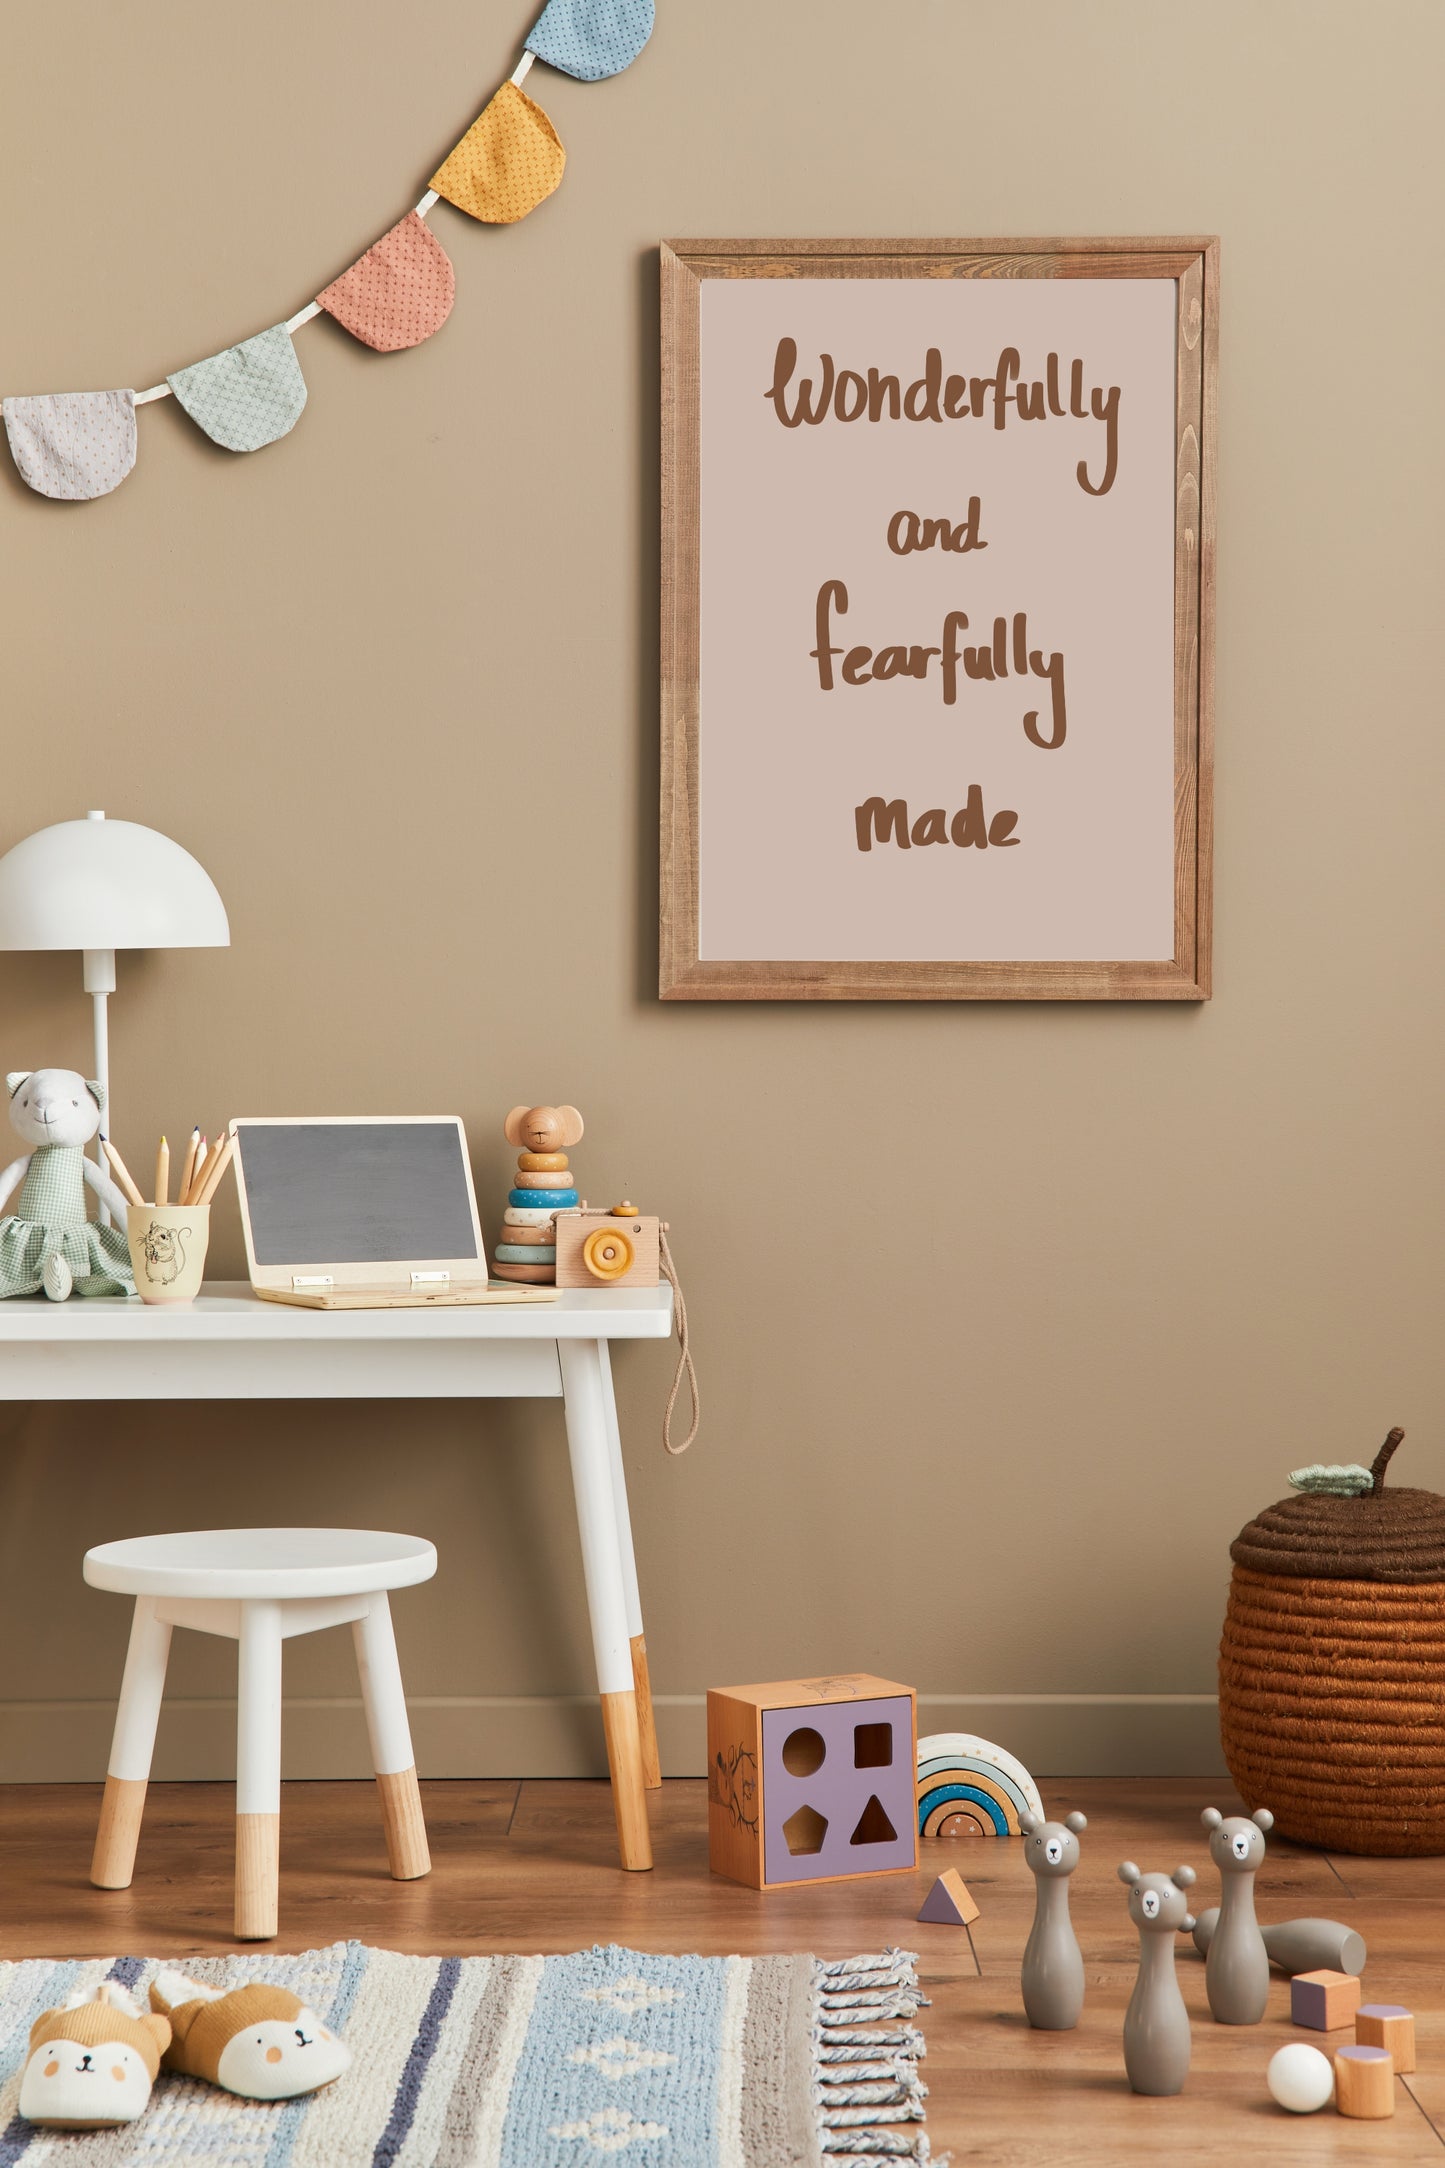 Wonderfully and fearfully made - nursery poster